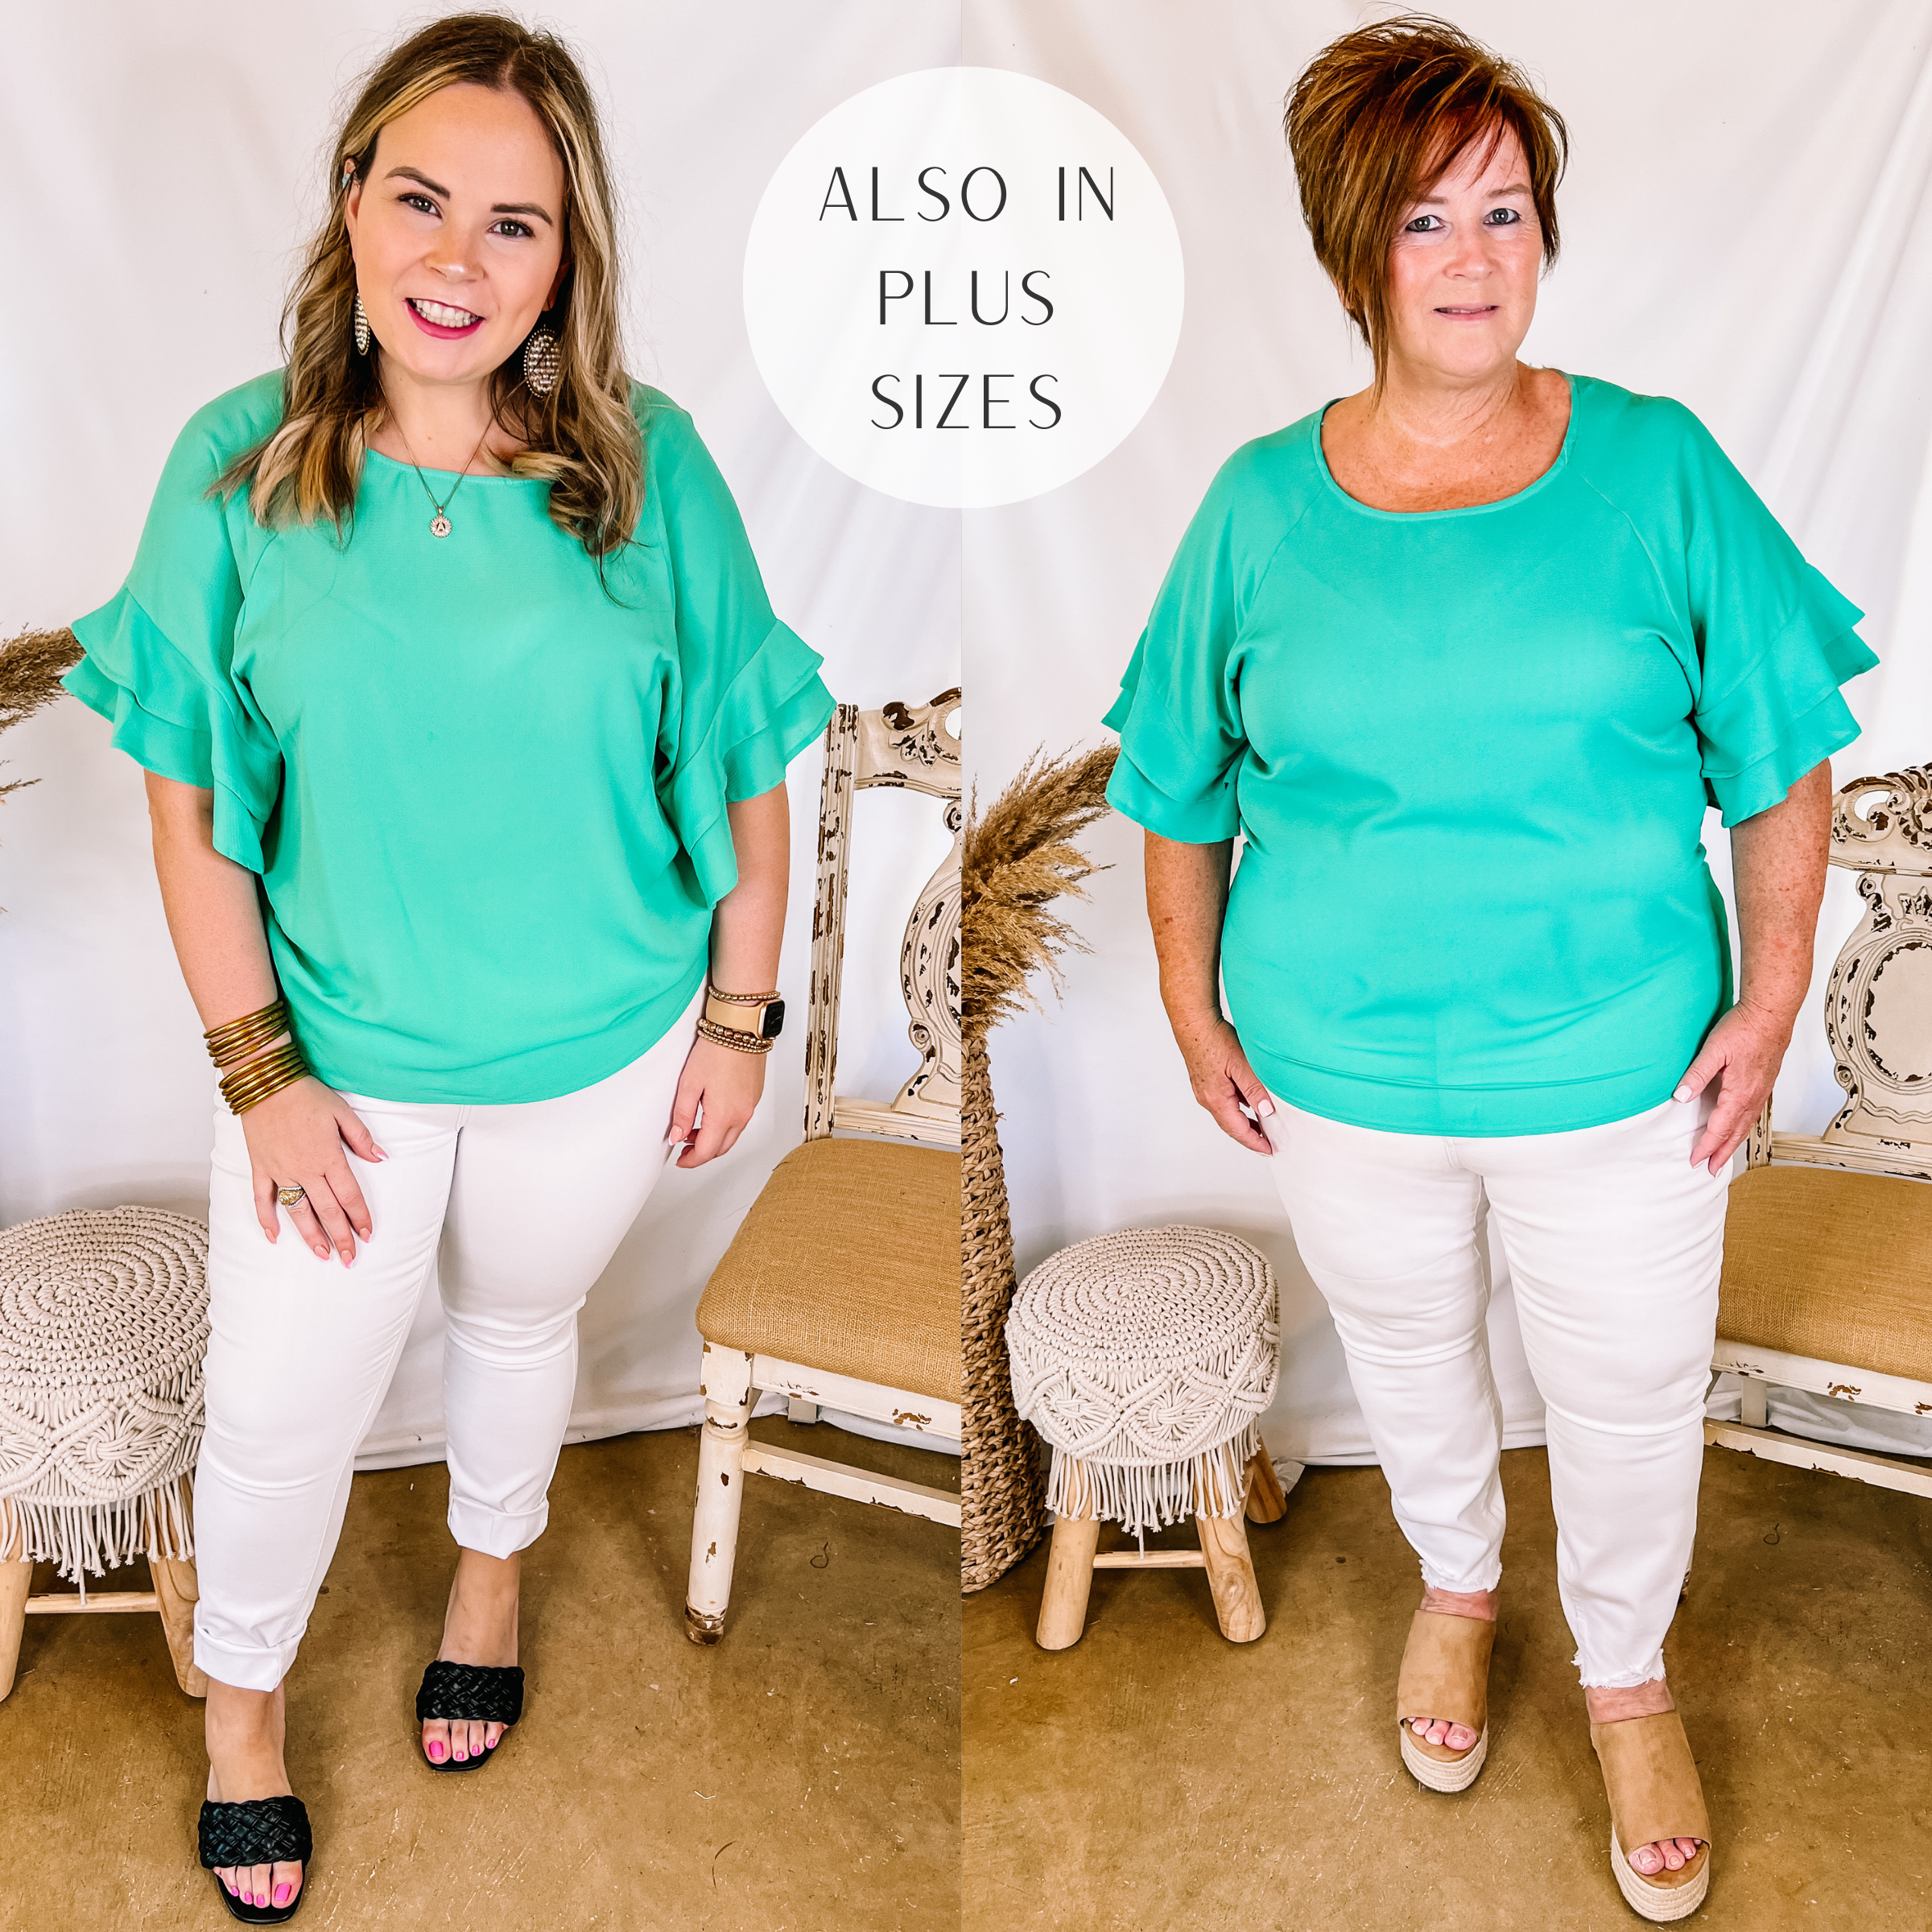 Models are wearing a ruffle sleeve blouse that is mint green. Size large model has it paired with black heels, white skinnies, and gold jewelry. Plus size model has it paired with tan wedges and white skinnies.